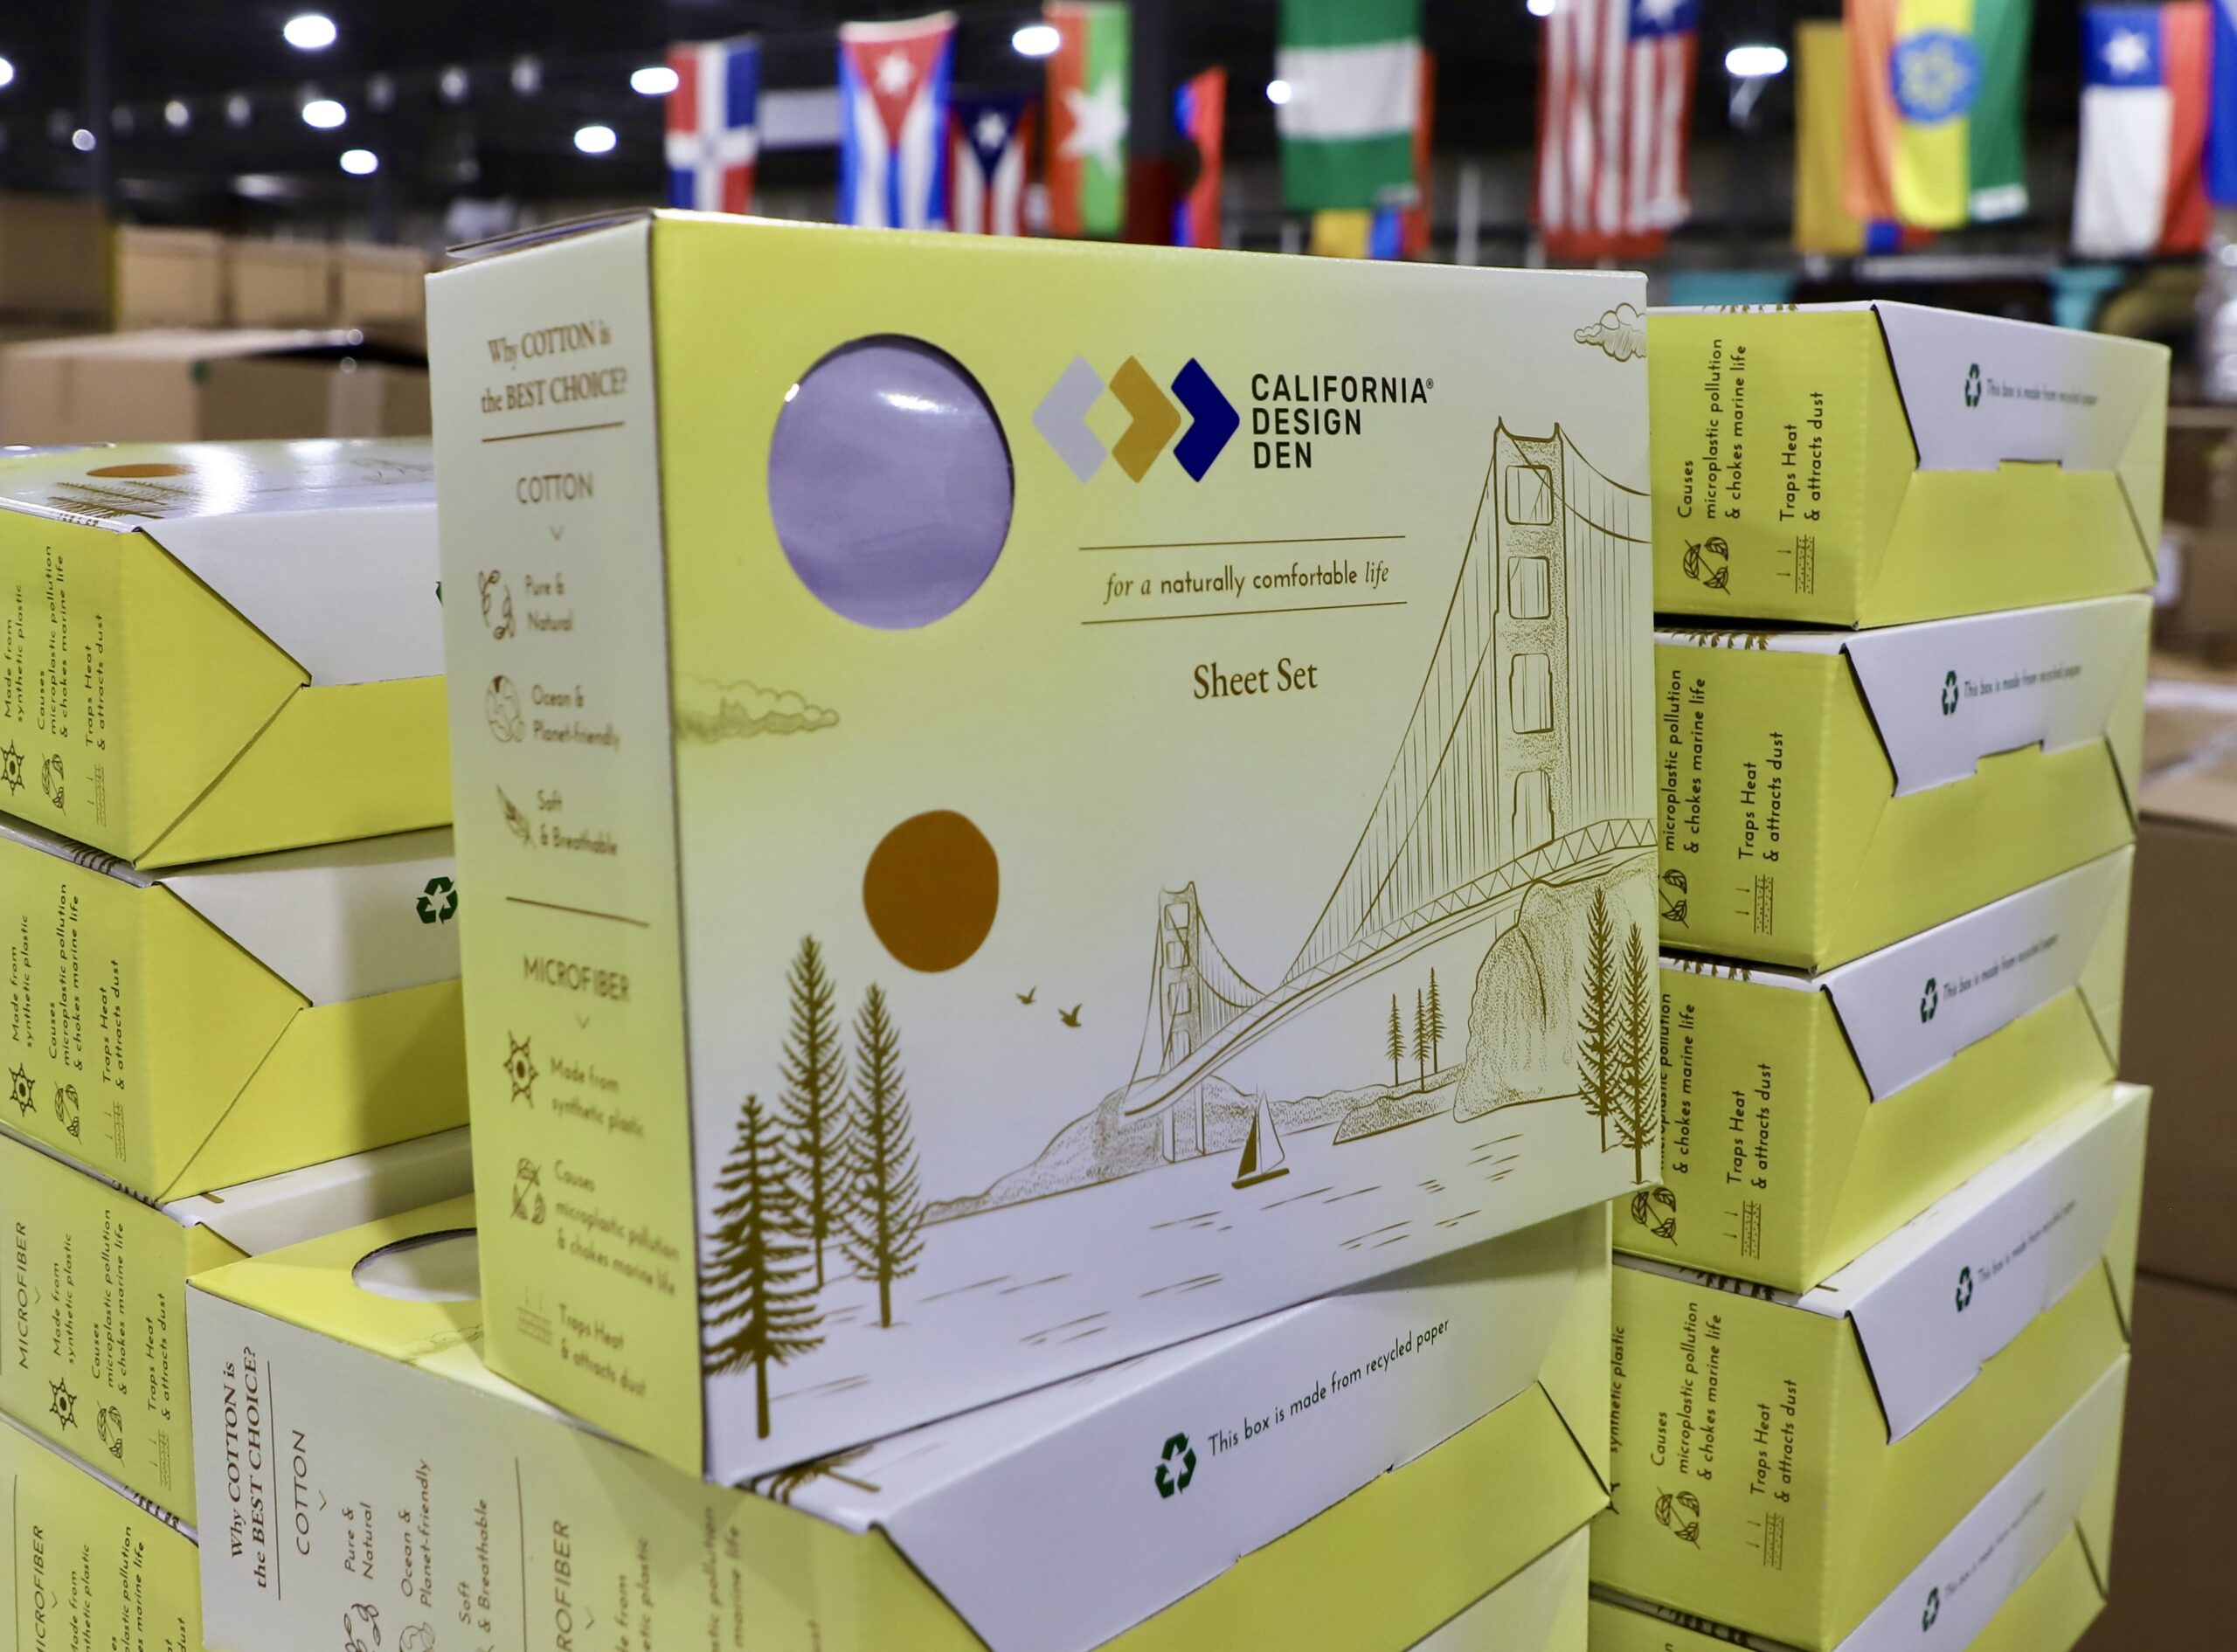 Yellow boxes of bedding product stacked in Warehouse awaiting reverse logistics support.